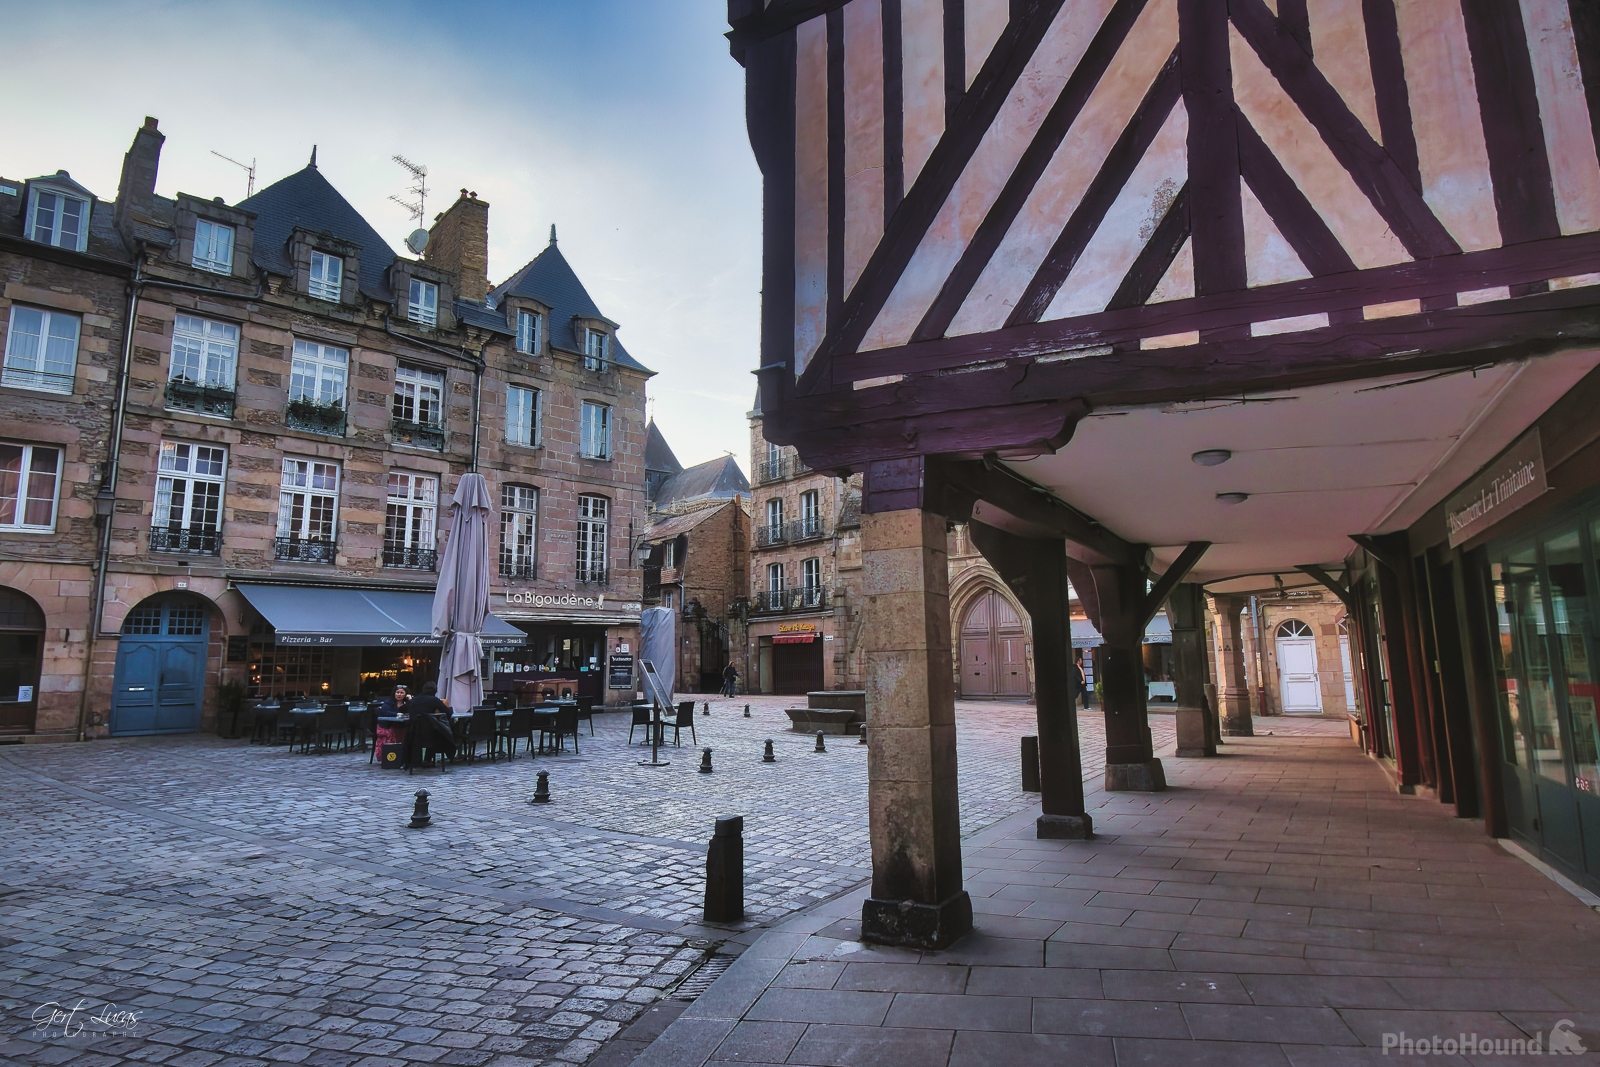 Image of Place des Cordeliers, Dinan, France by Gert Lucas